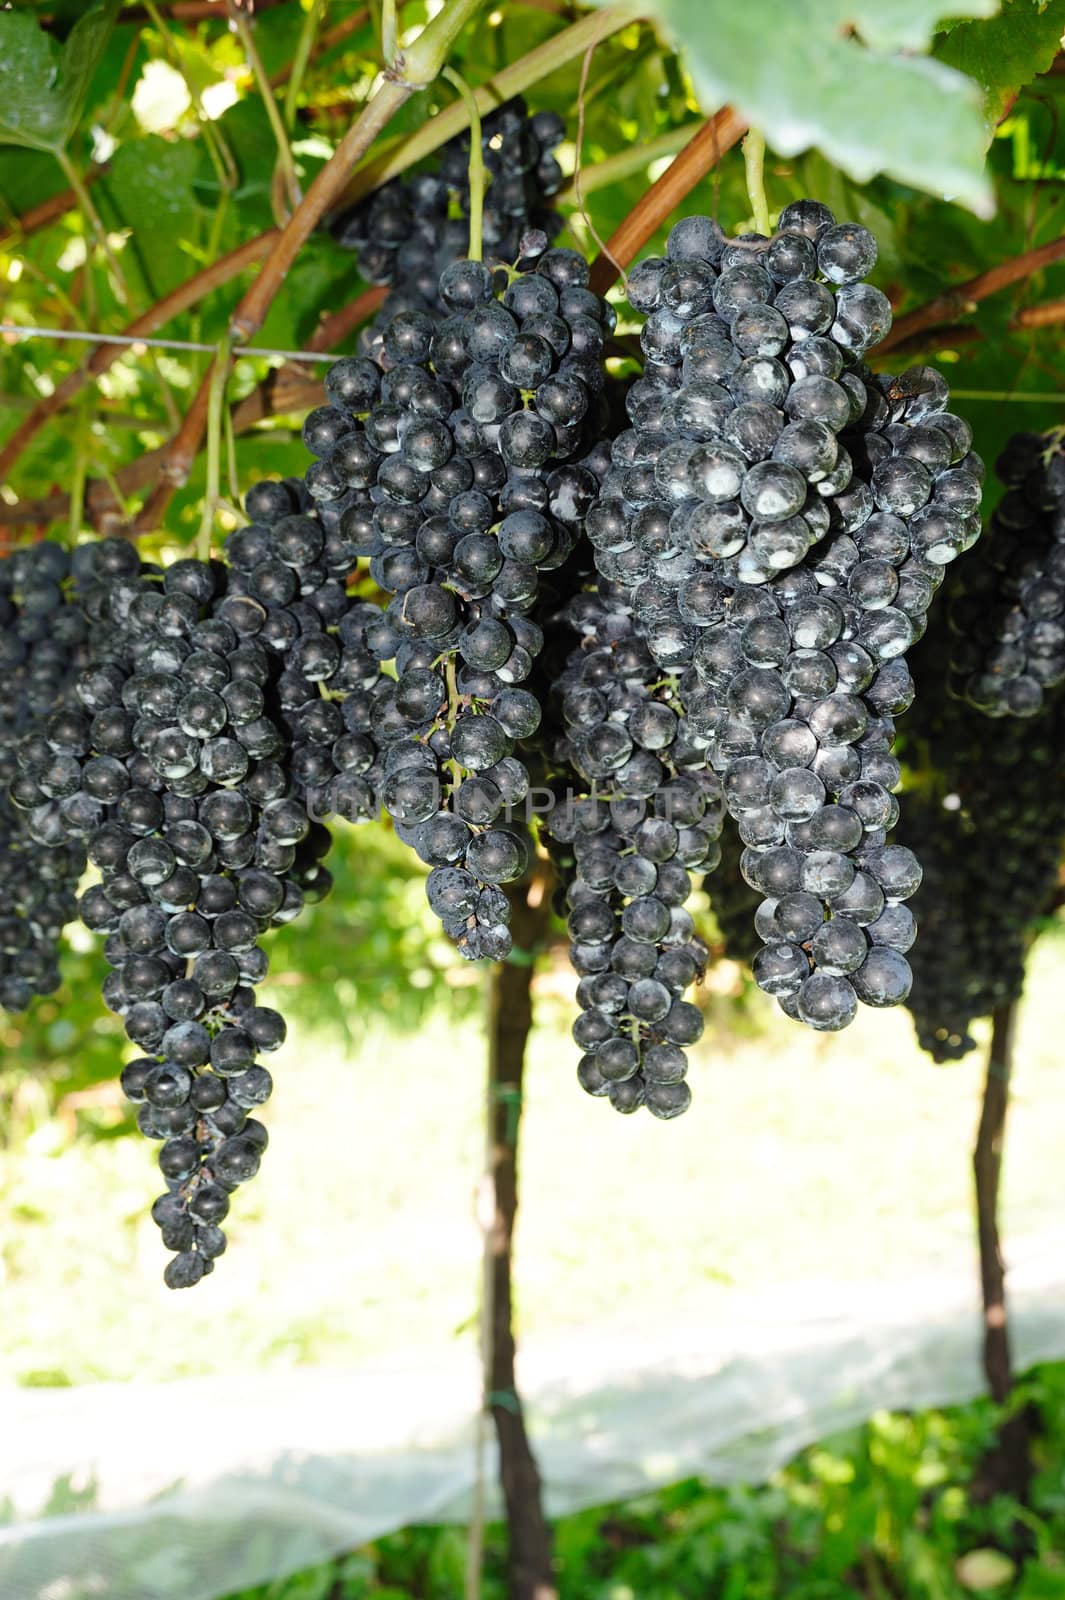 An image of blue grapes in the vineyard